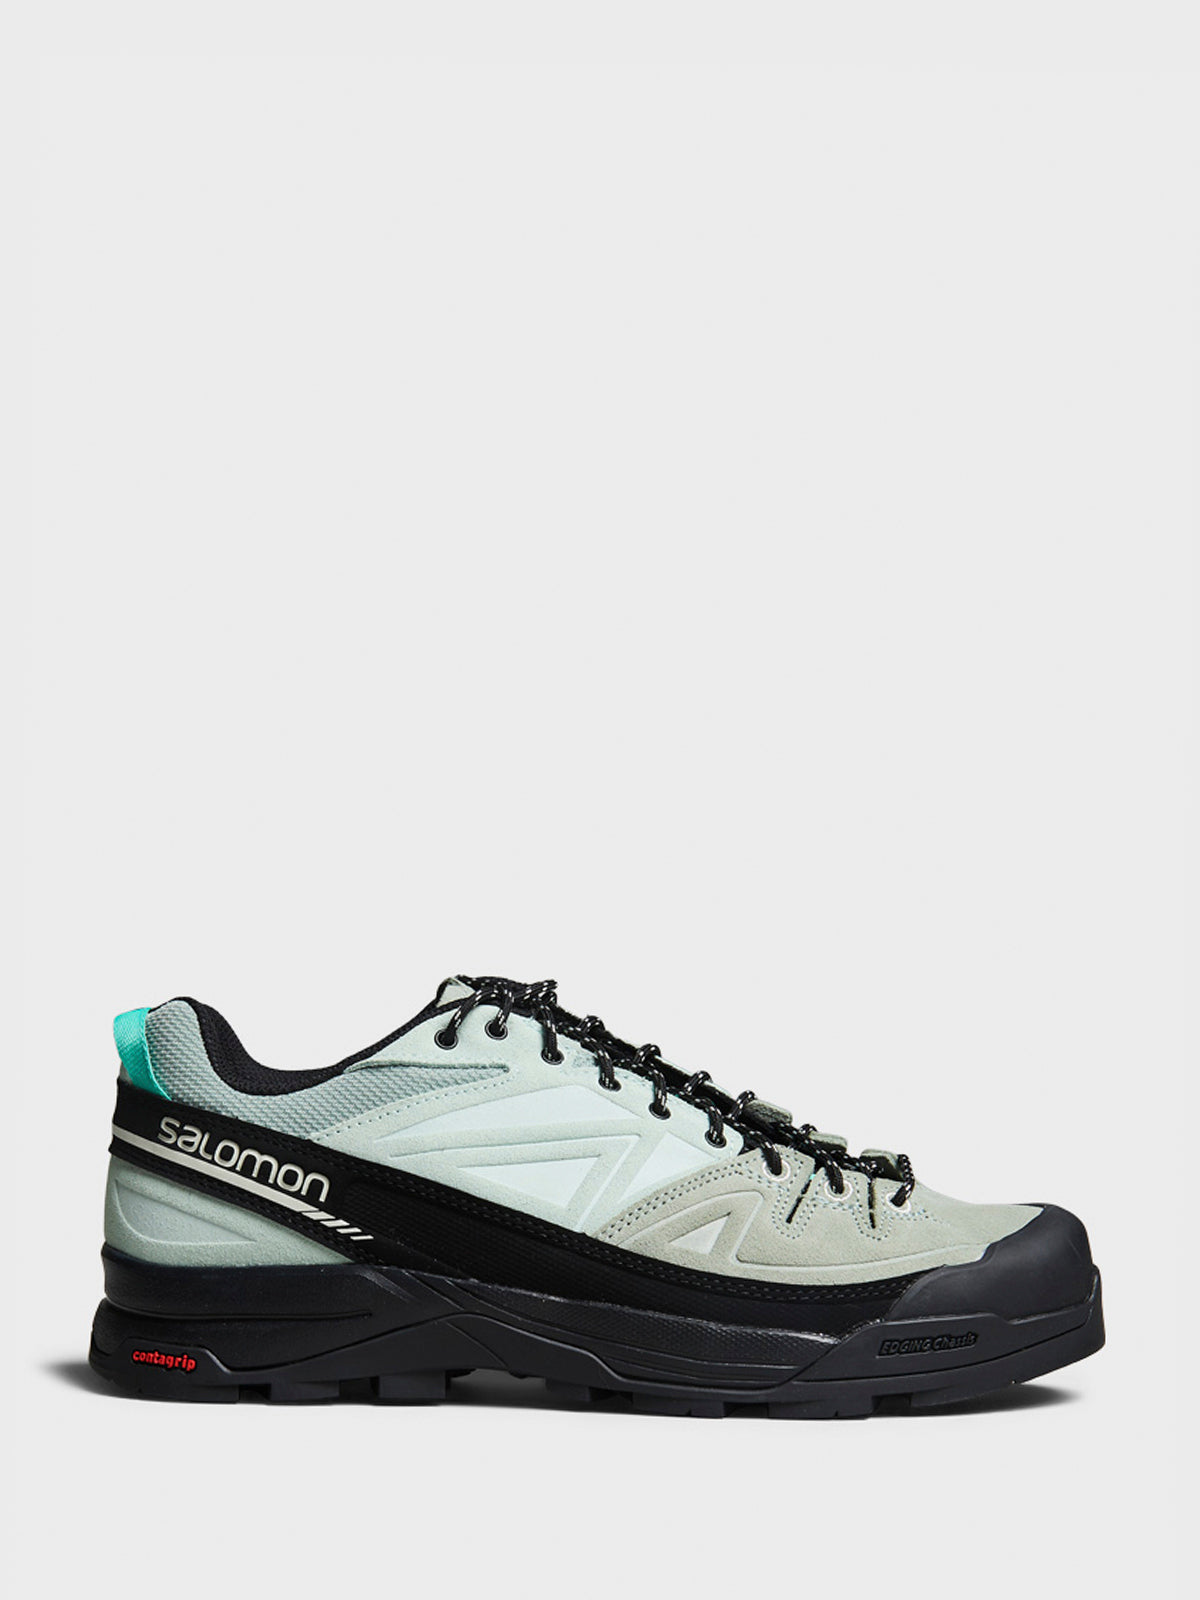 X-ALP LTR Sneakers in Black and Green